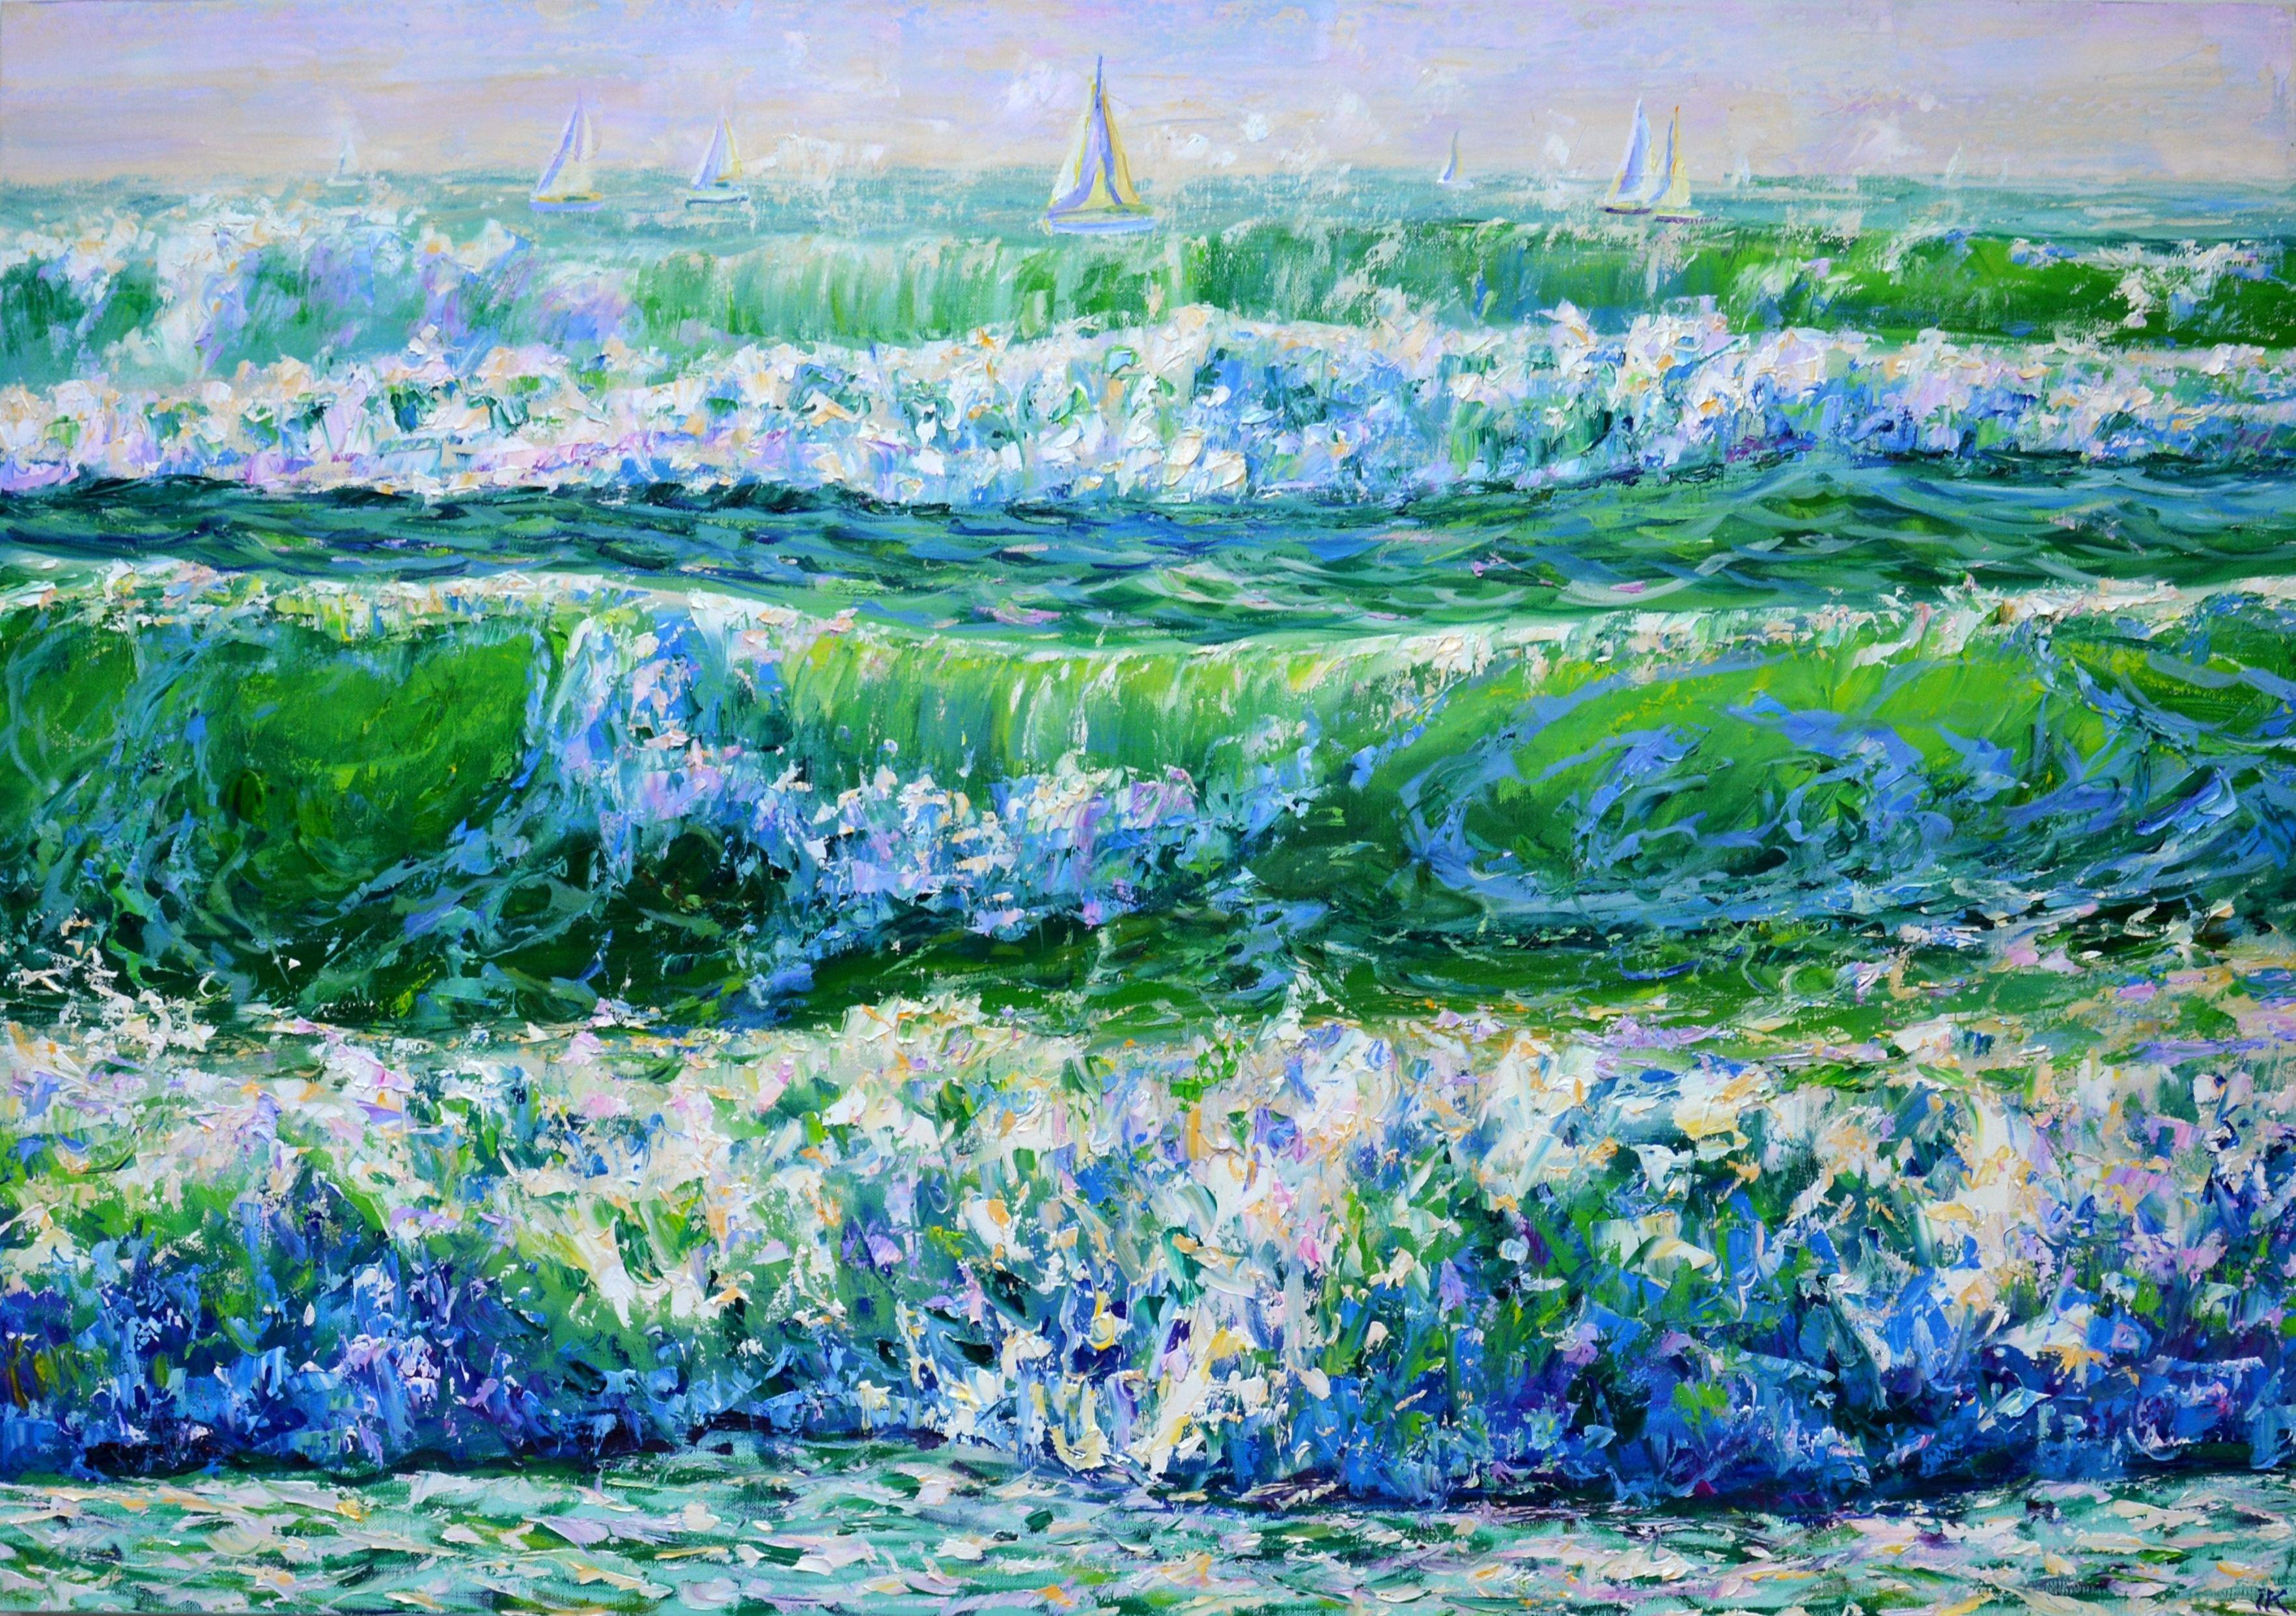 Sailboats sail along the horizon, daylight reflects off the rolling waves. A tough palette of knives and a rich palette of purple, green and white emphasize the energy of the ocean. Part  ongoing series of seascapes: Sea, seascape, ocean, waves,